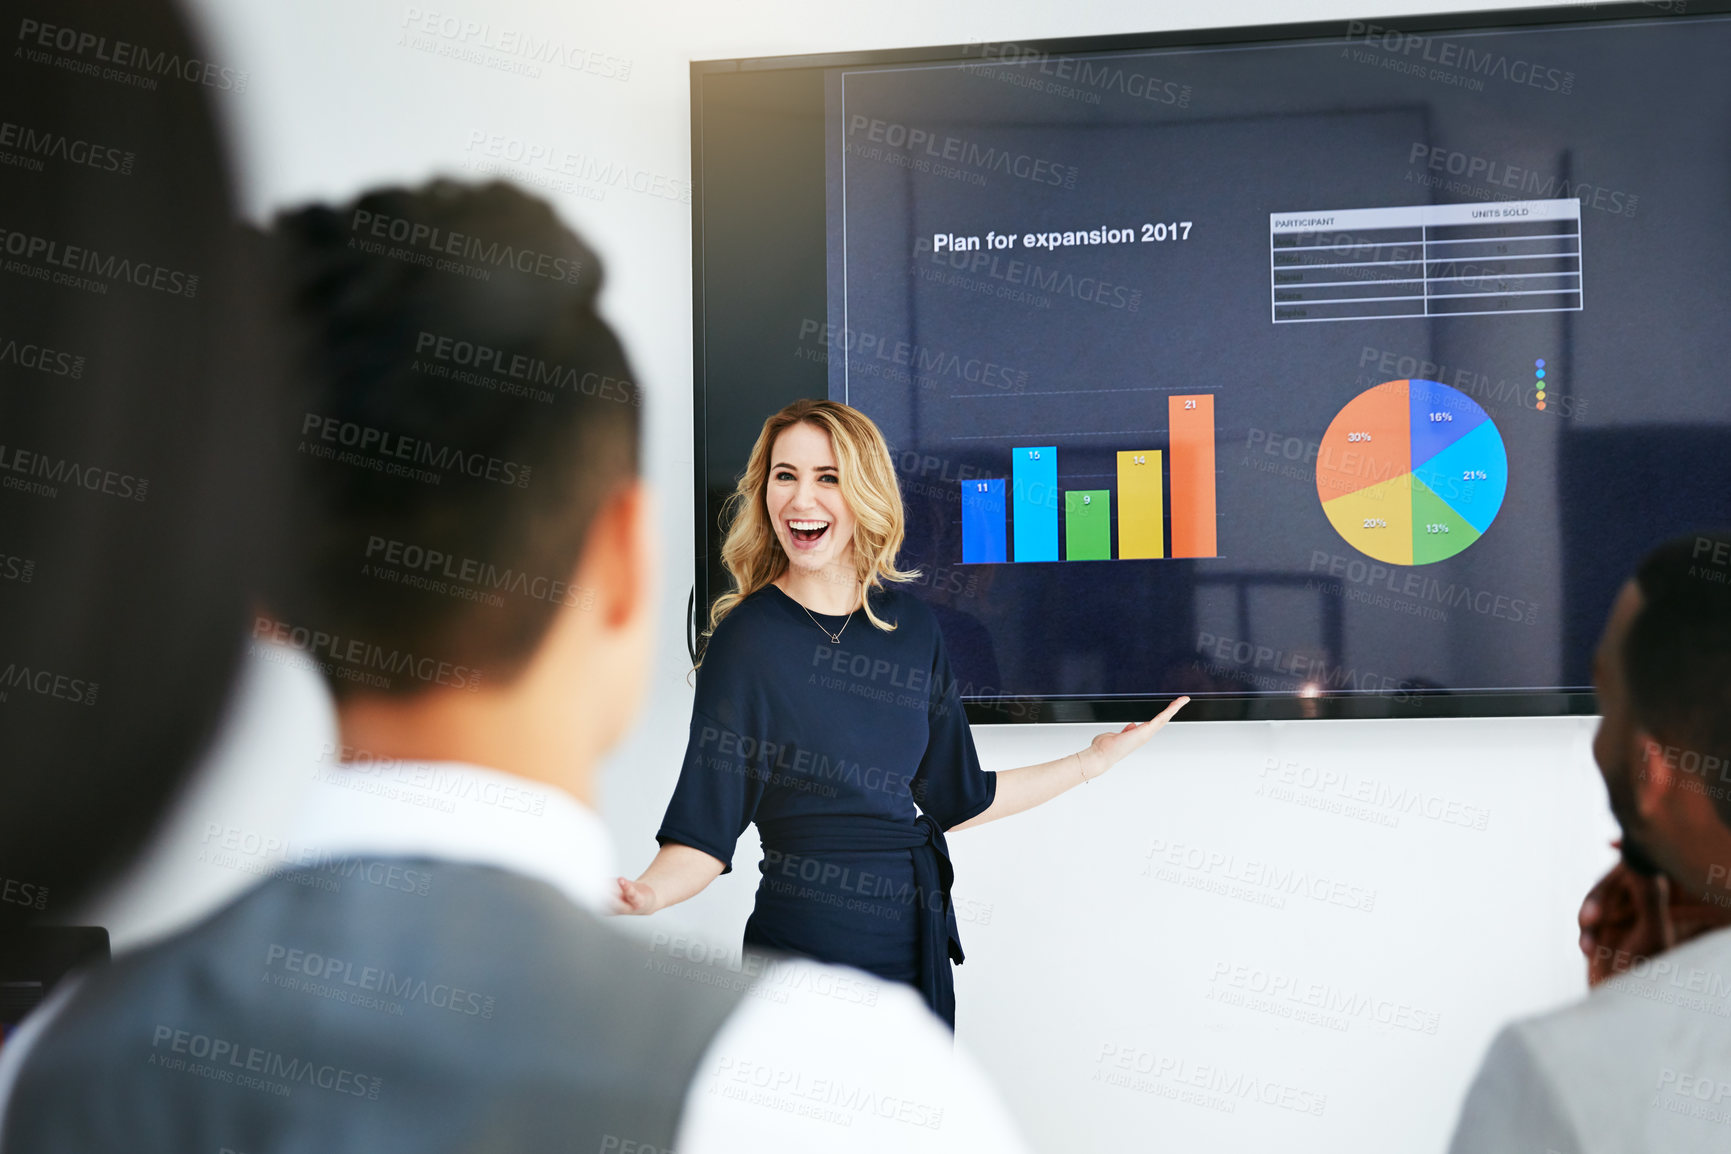 Buy stock photo Shot of a businesswoman giving a presentation to her colleagues at work